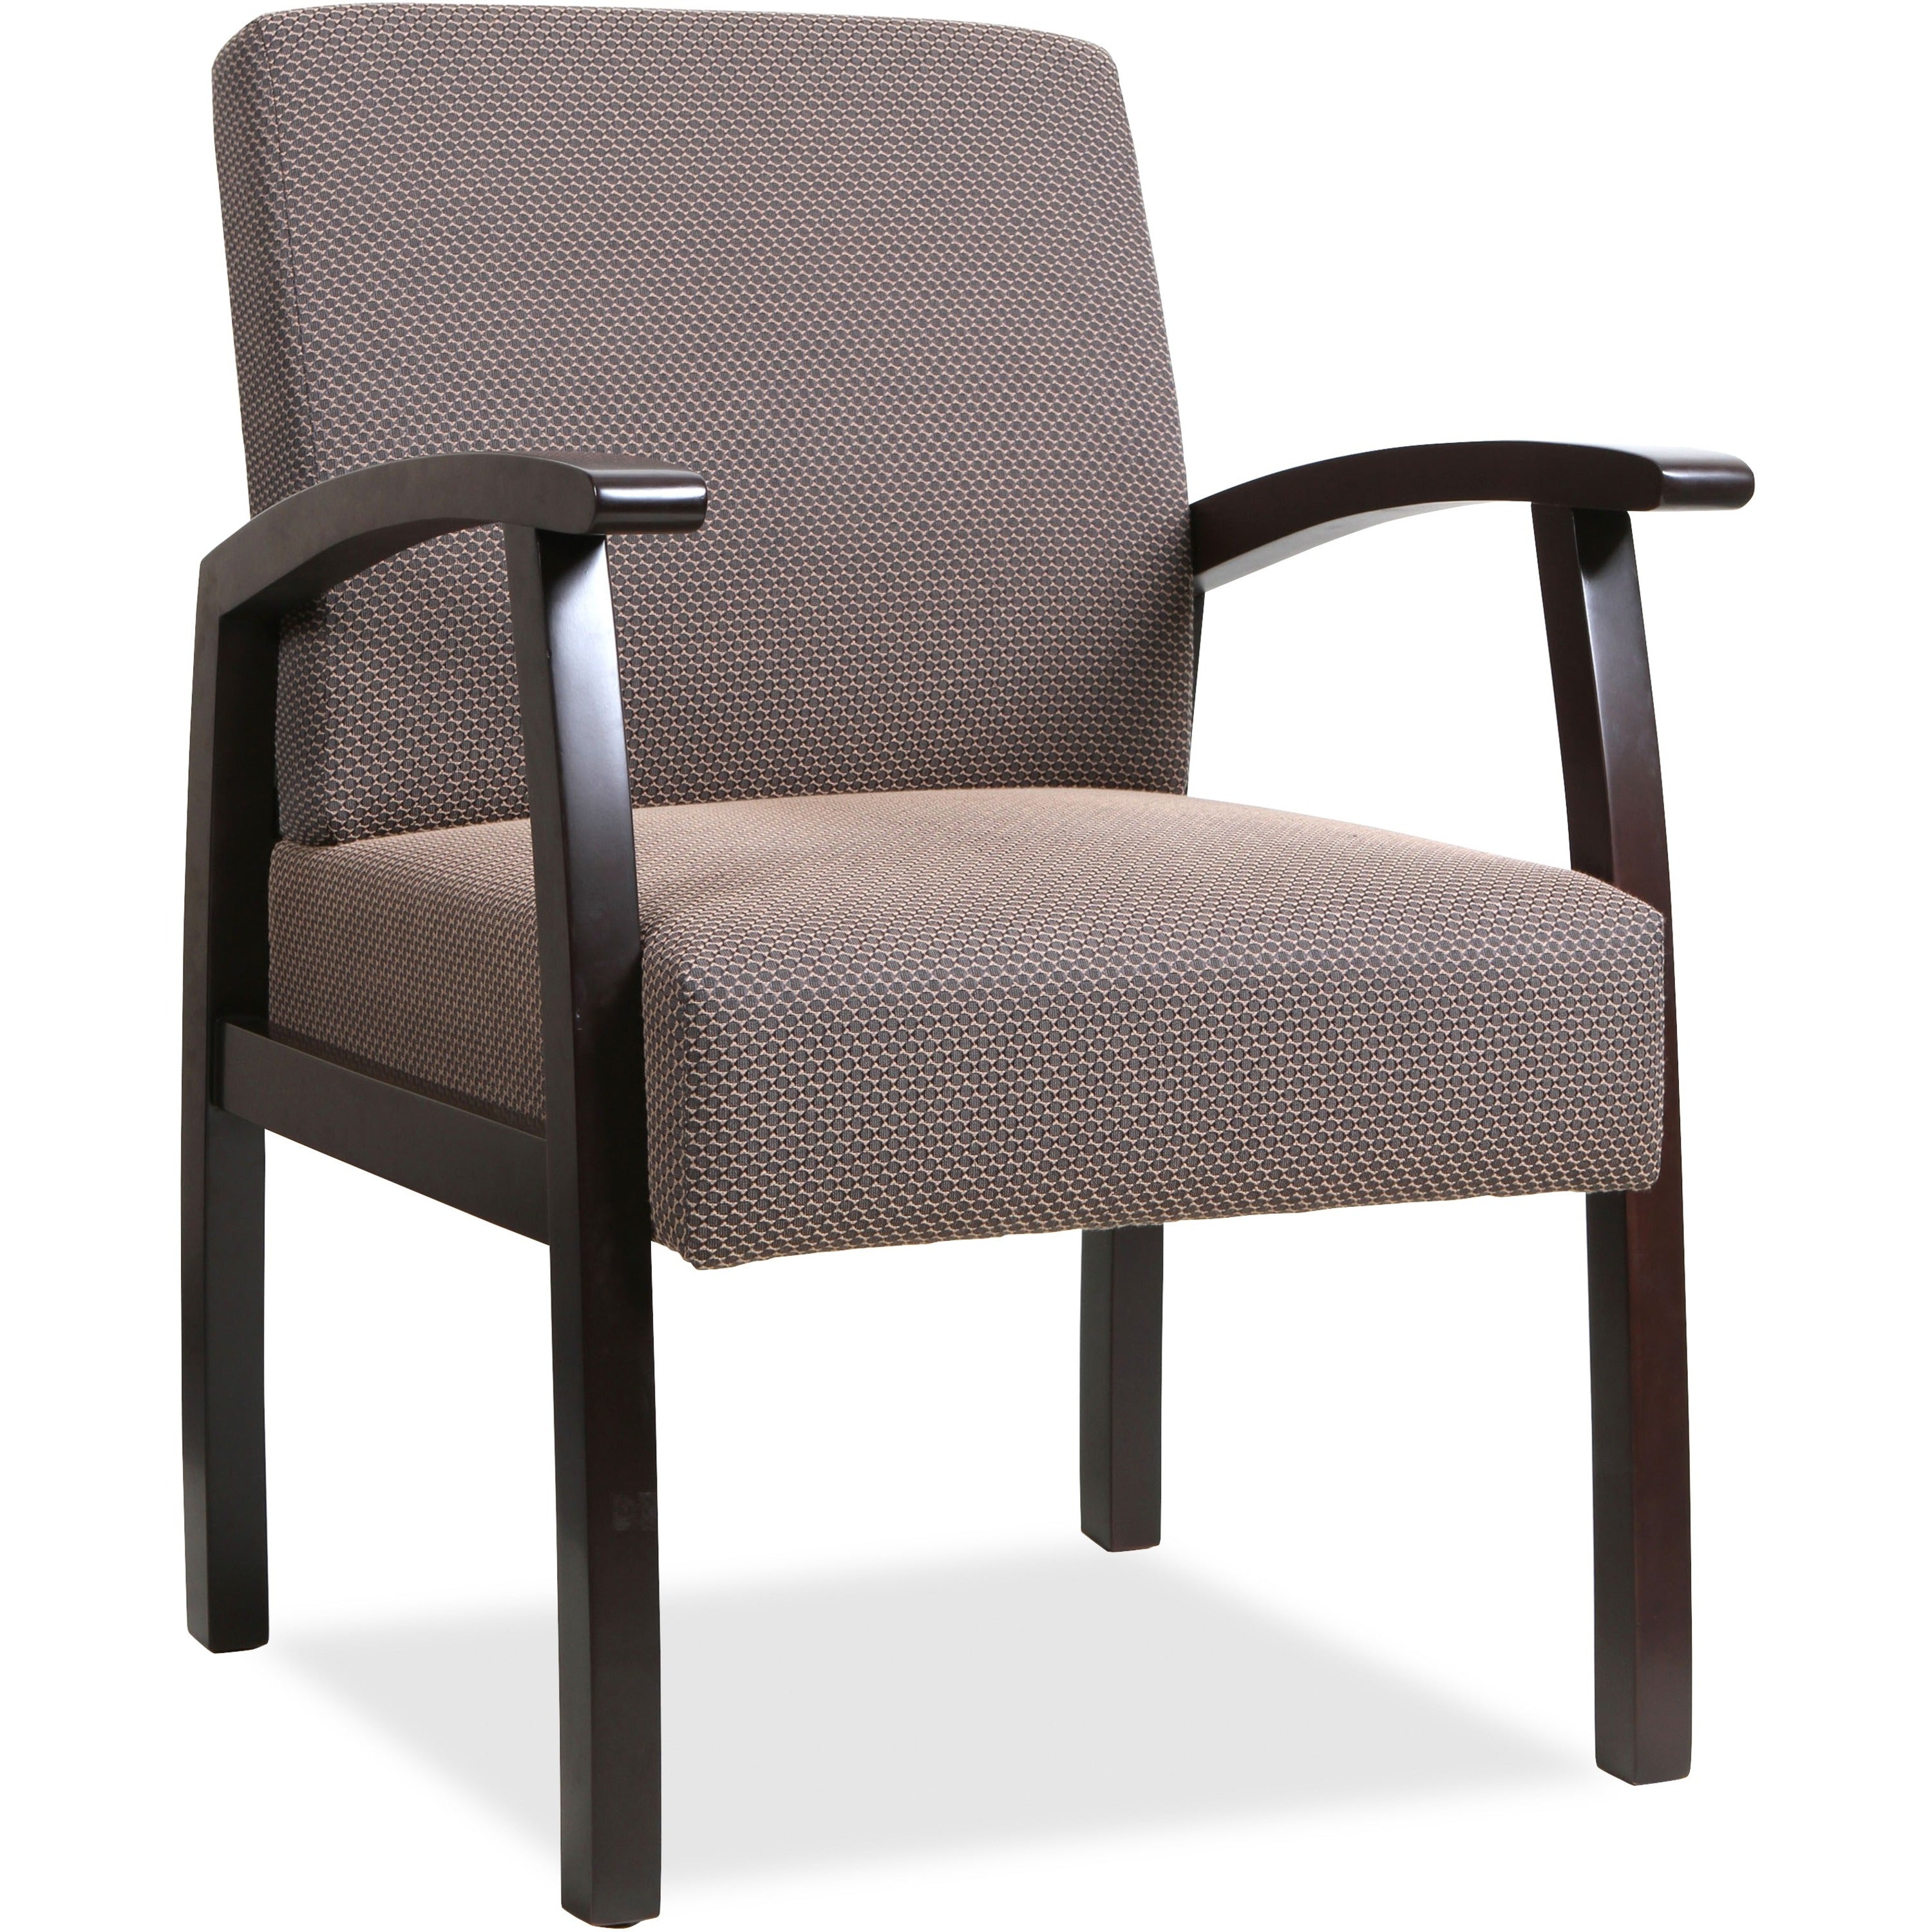 Lorell Thickly Padded Guest Chair - Espresso Frame - Four-legged Base - Taupe - 1 Each - 